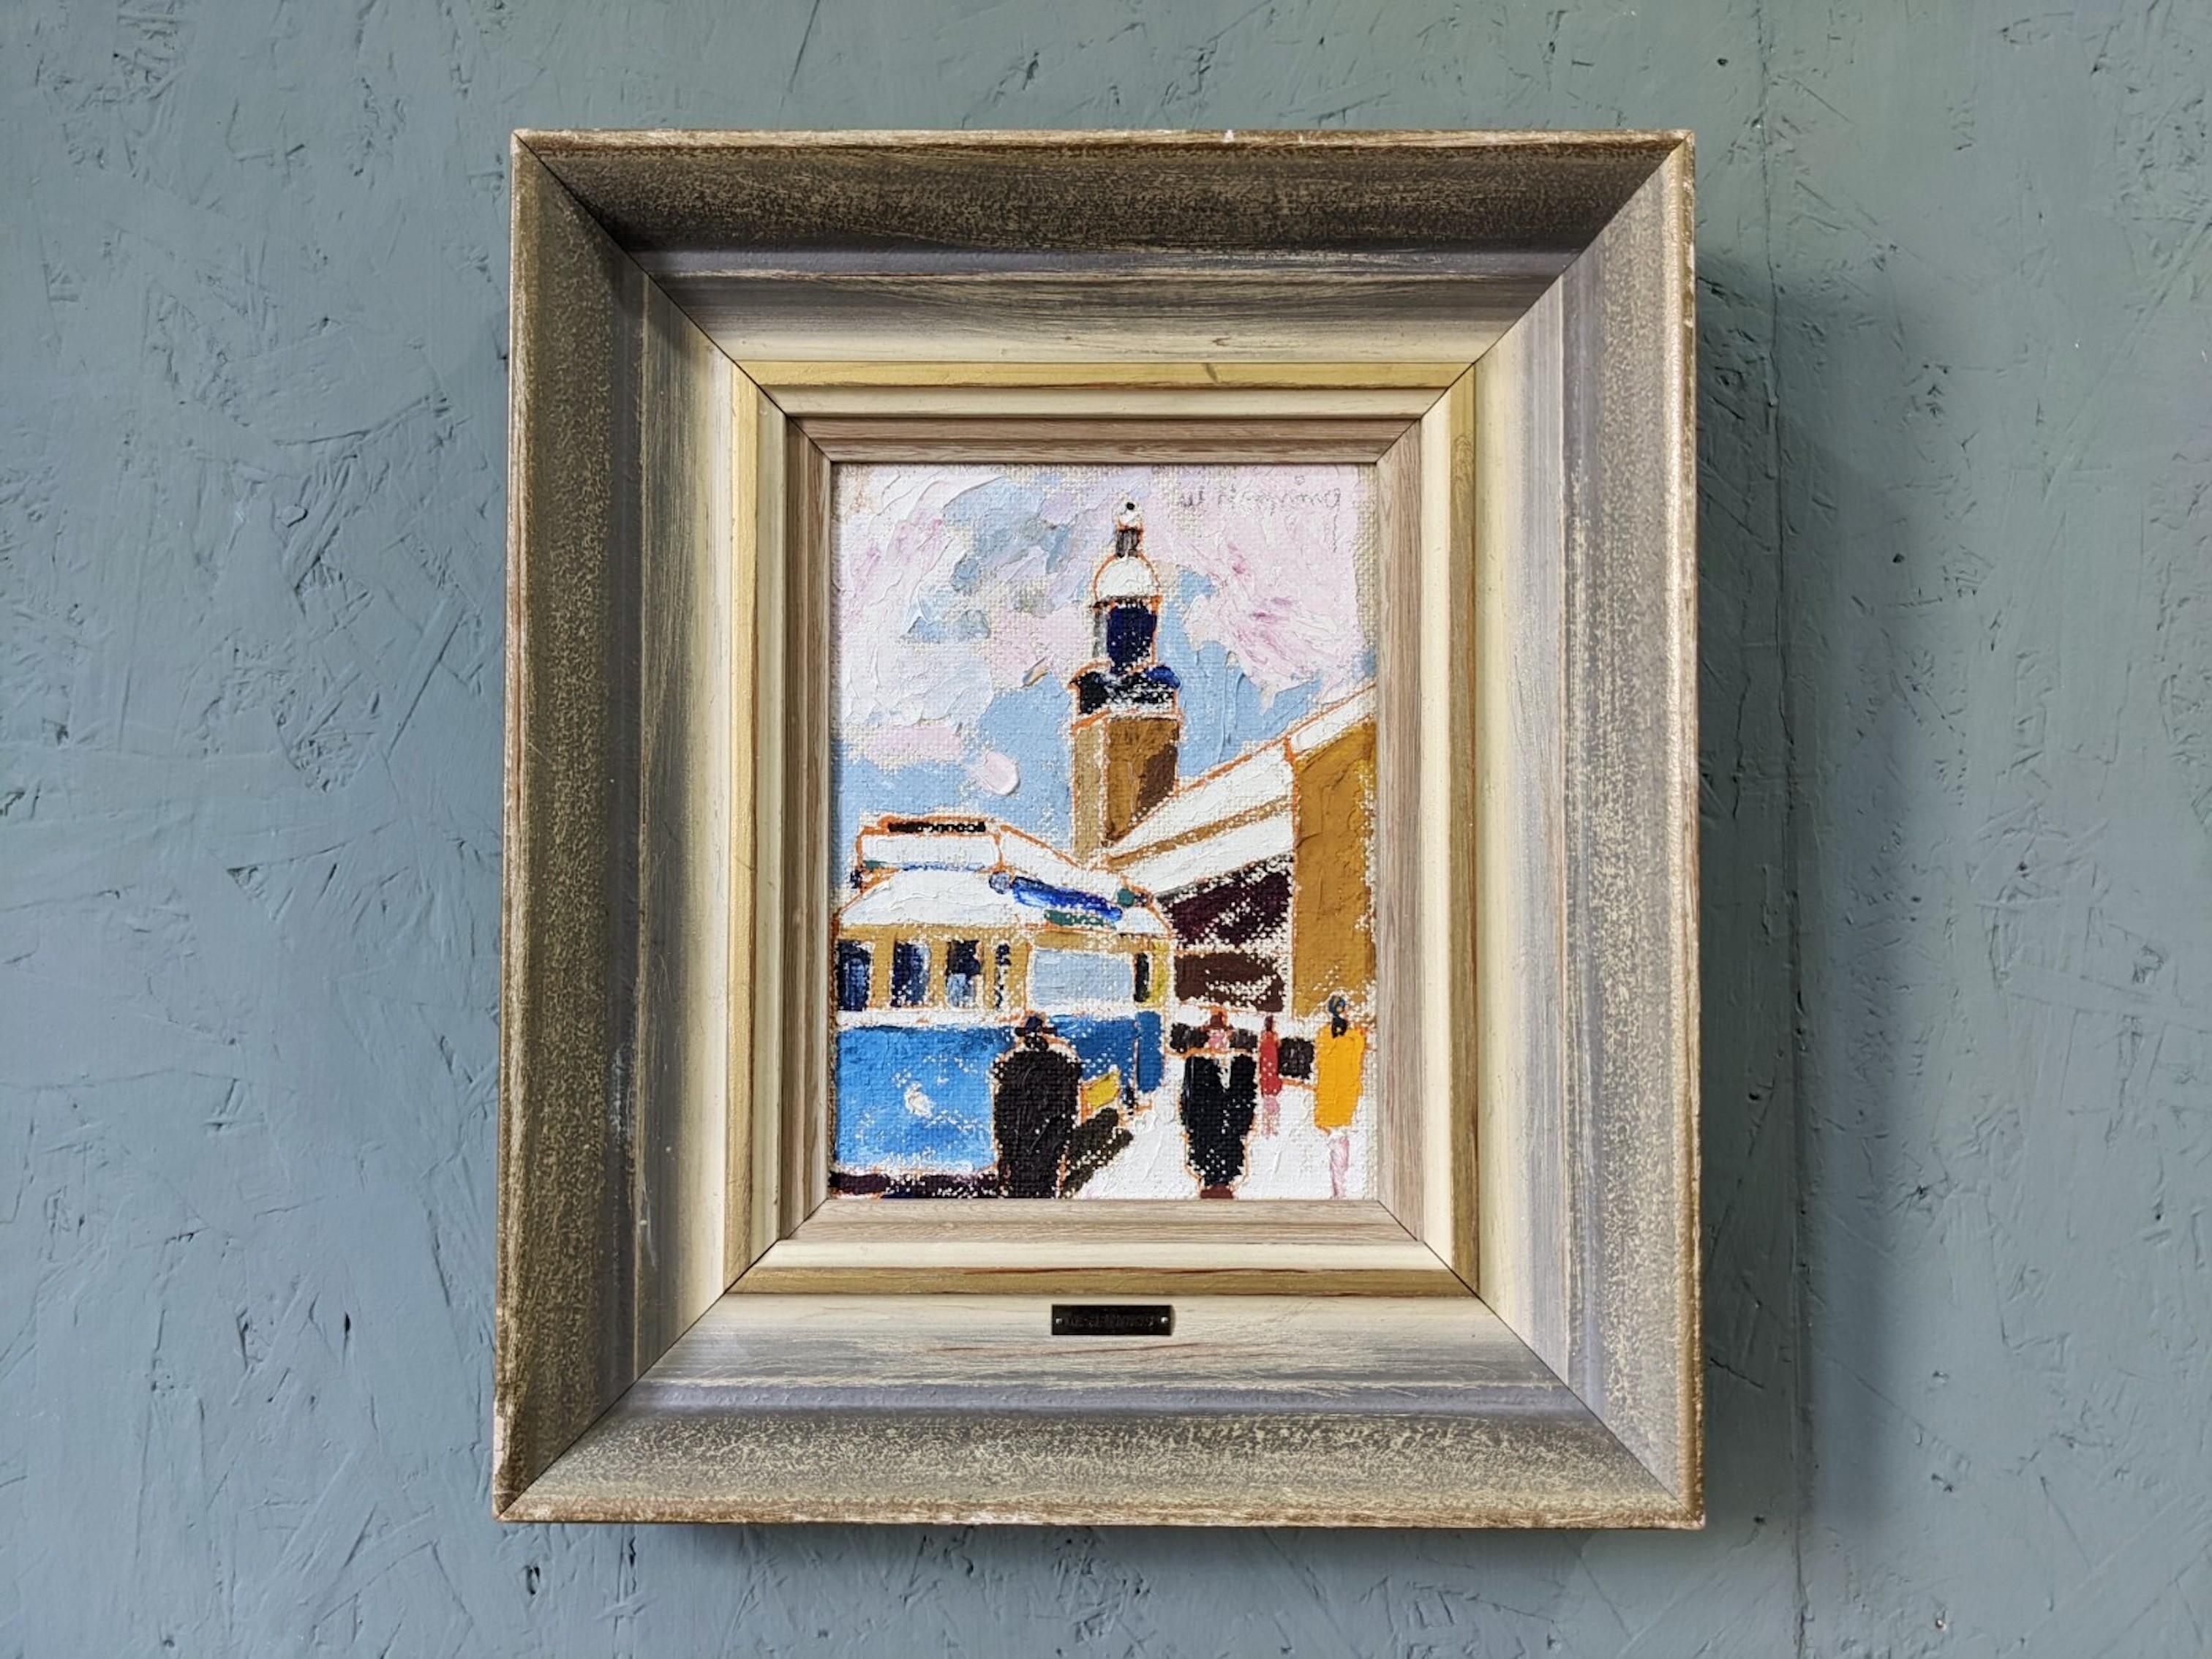 TRAM STOP
Size: 35 x 30 cm (including frame)
Oil on Board

A small yet very striking modernist street scene composition, executed in oil onto board.

The painting depicts a bustling scene in a city with a tram stopping on the left, figures lining a